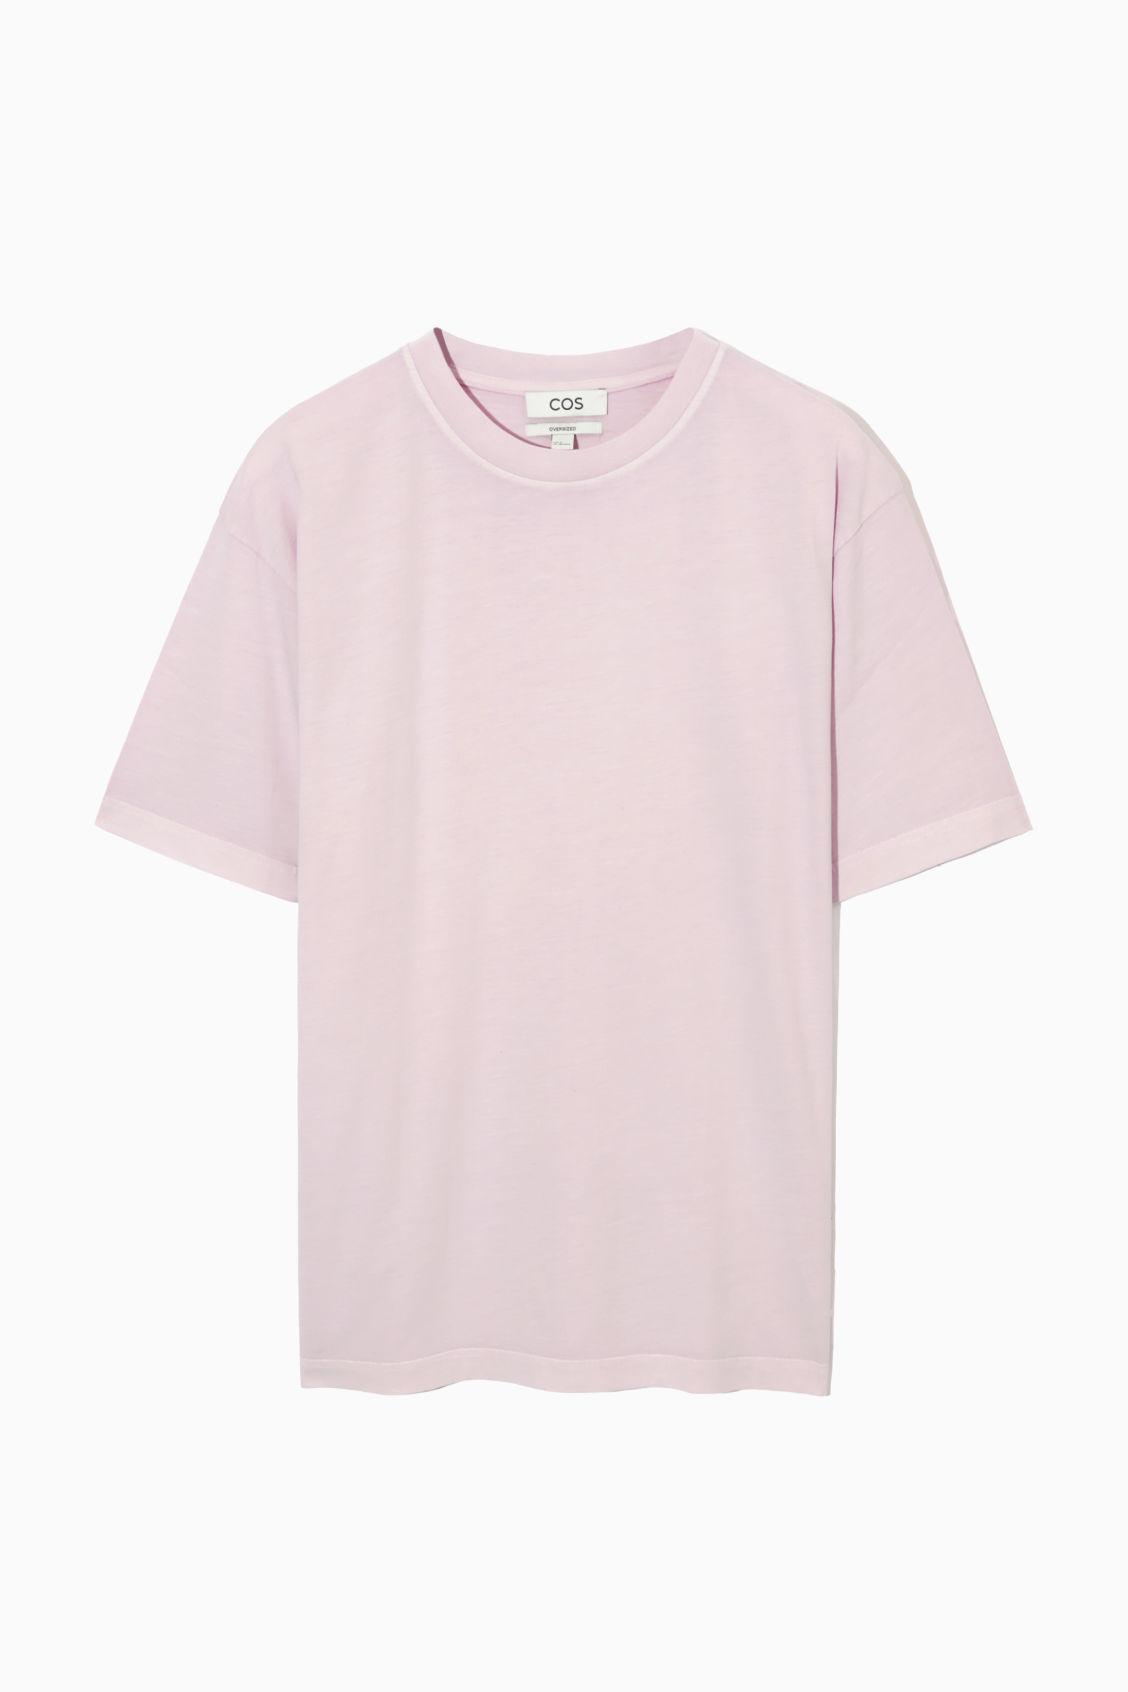 T-shirt | COS Lyst in Men Slouch The for Pink Super